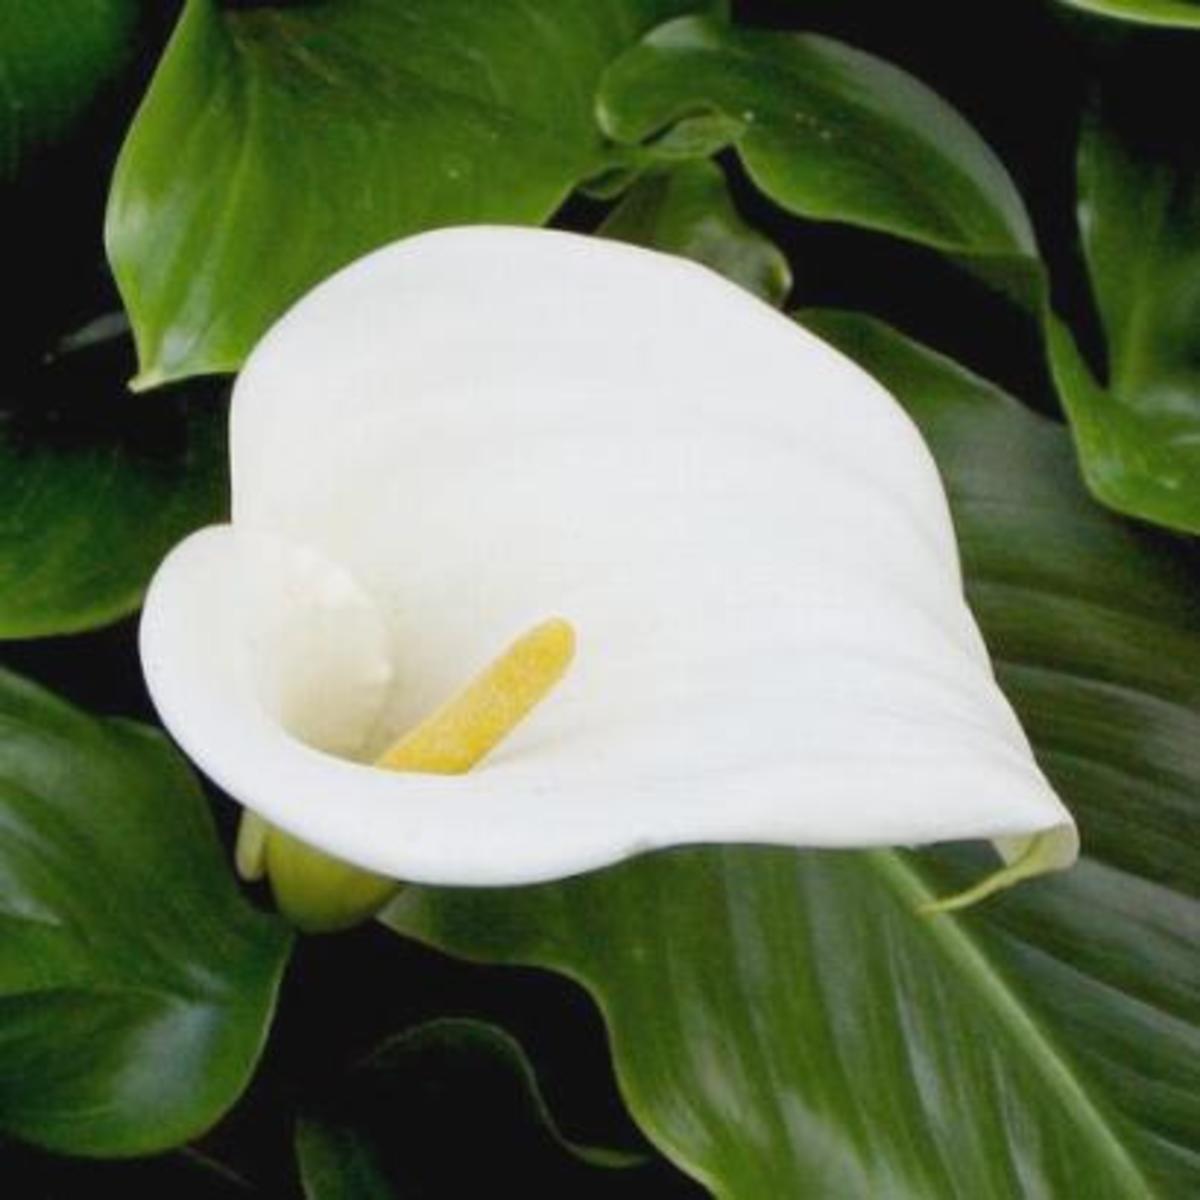 Lilies or a Lily can kill your cat within hours! hubpages